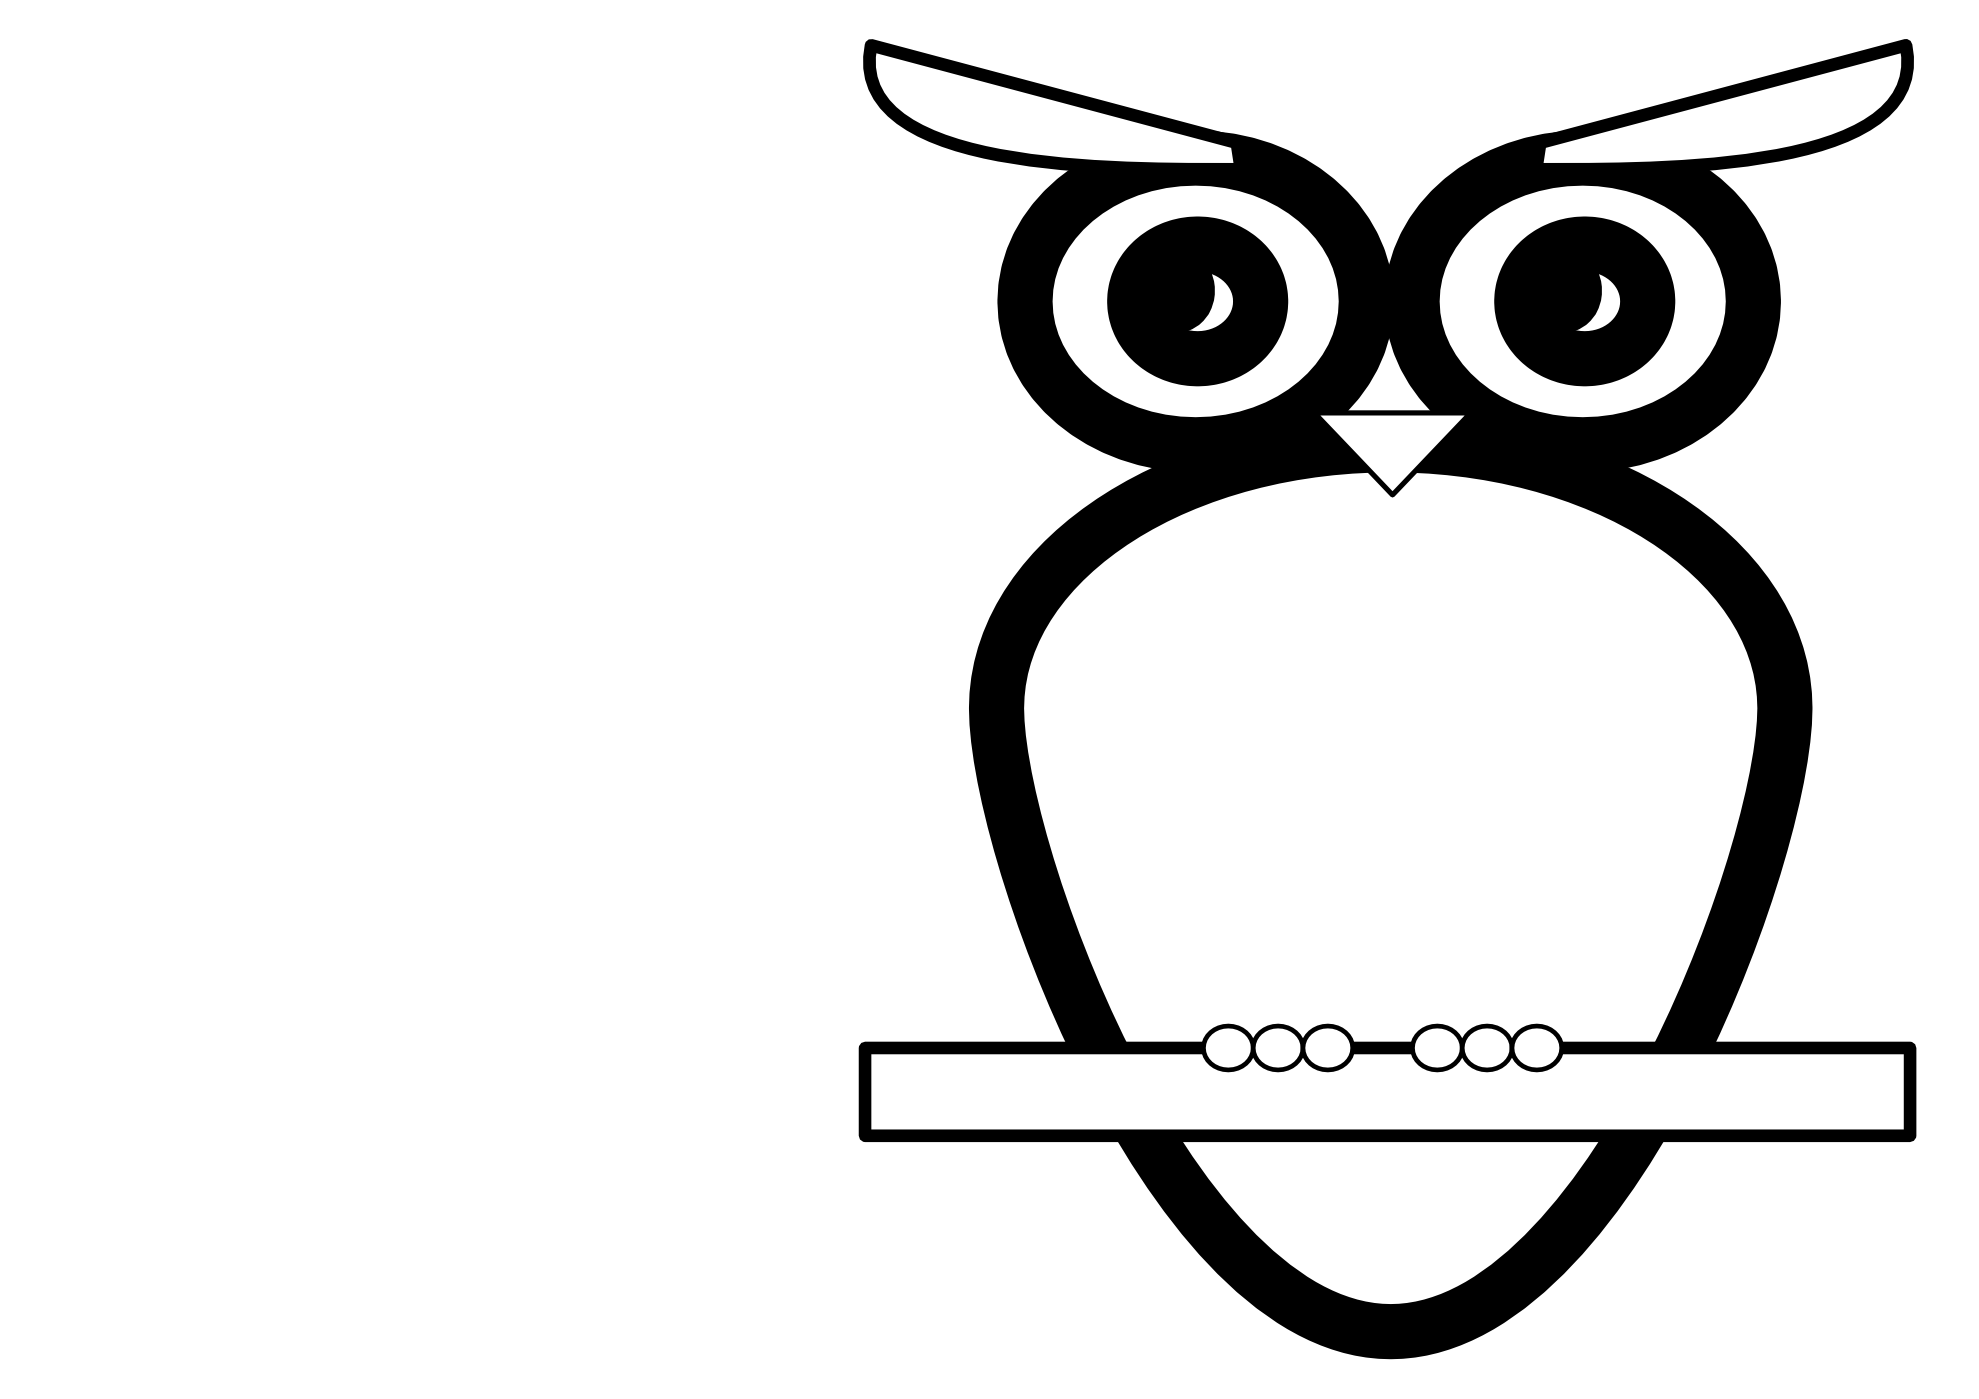 13 Owl Vector Art Free Cliparts That You Can Download To You Computer